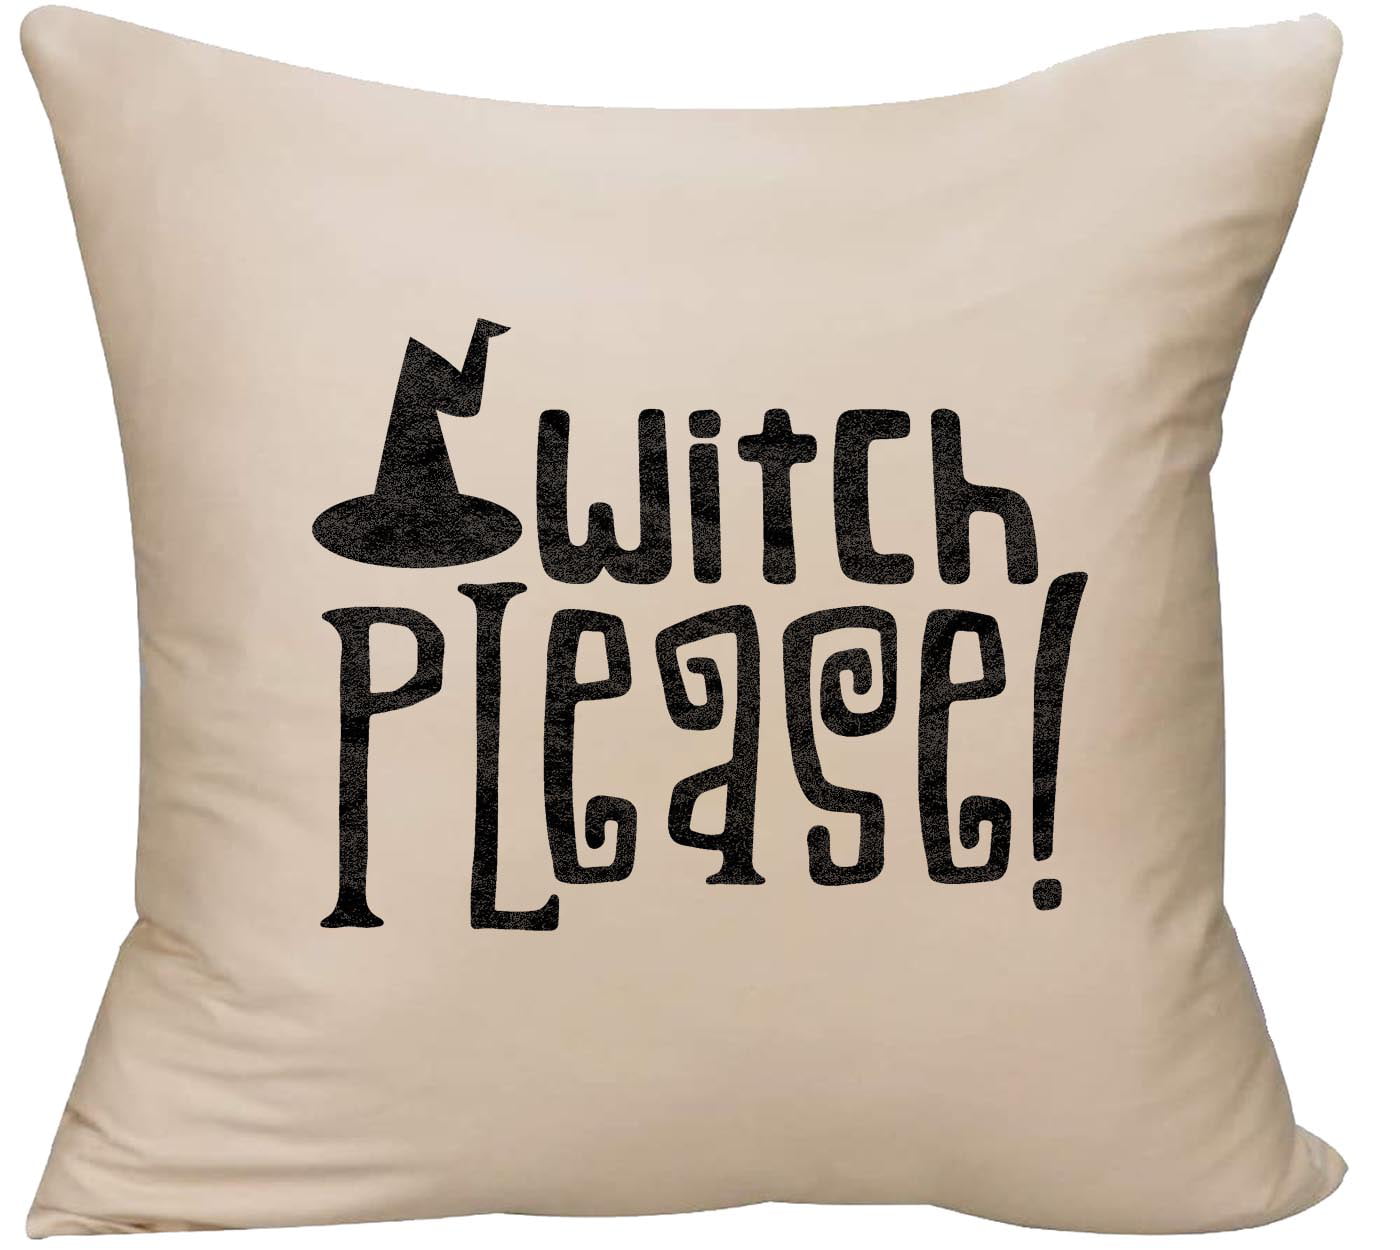 18x18 Multicolor Witch Please Witch halloween Throw Pillow